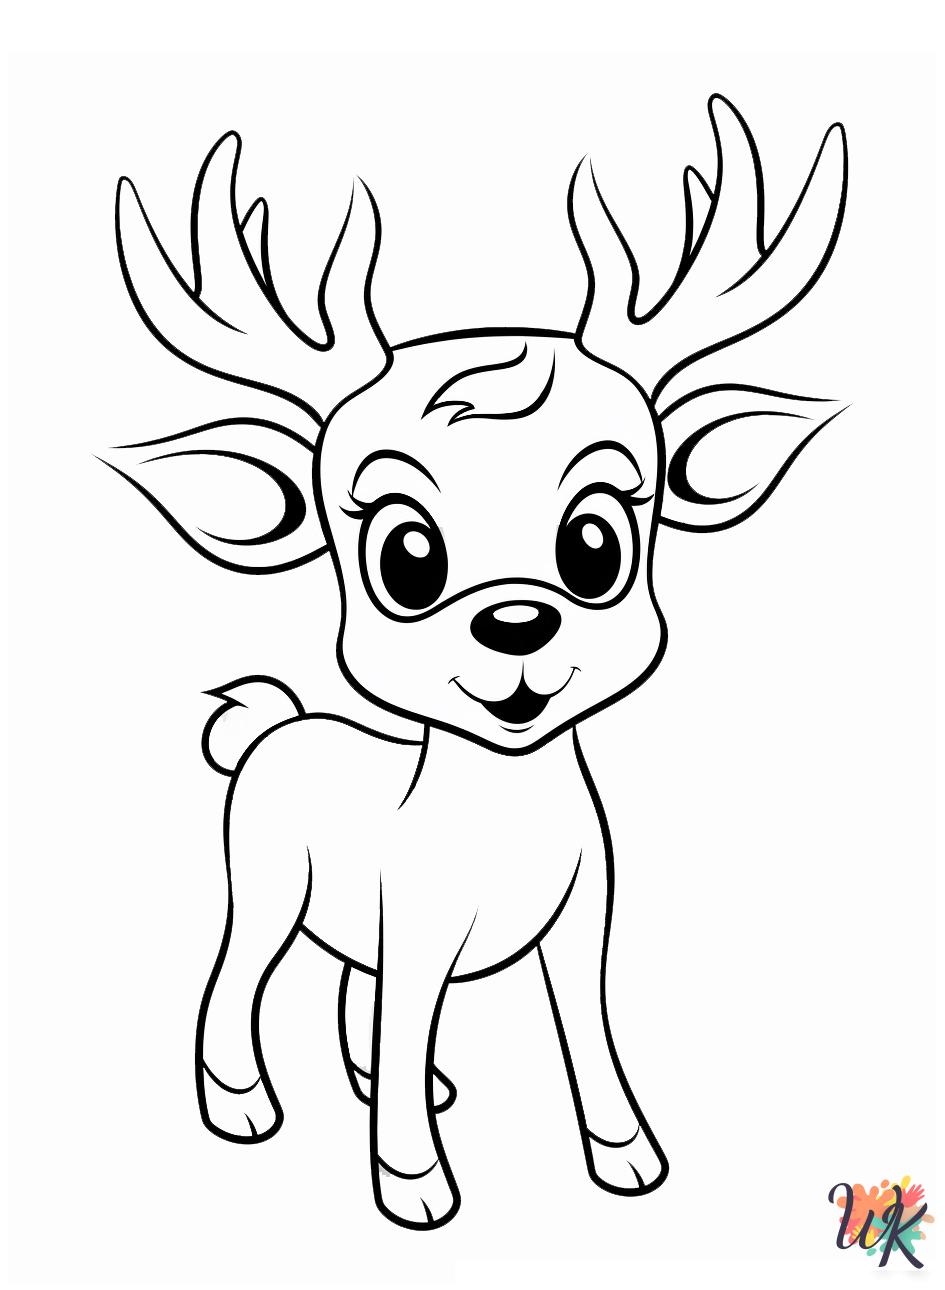 Rudolph adult coloring pages